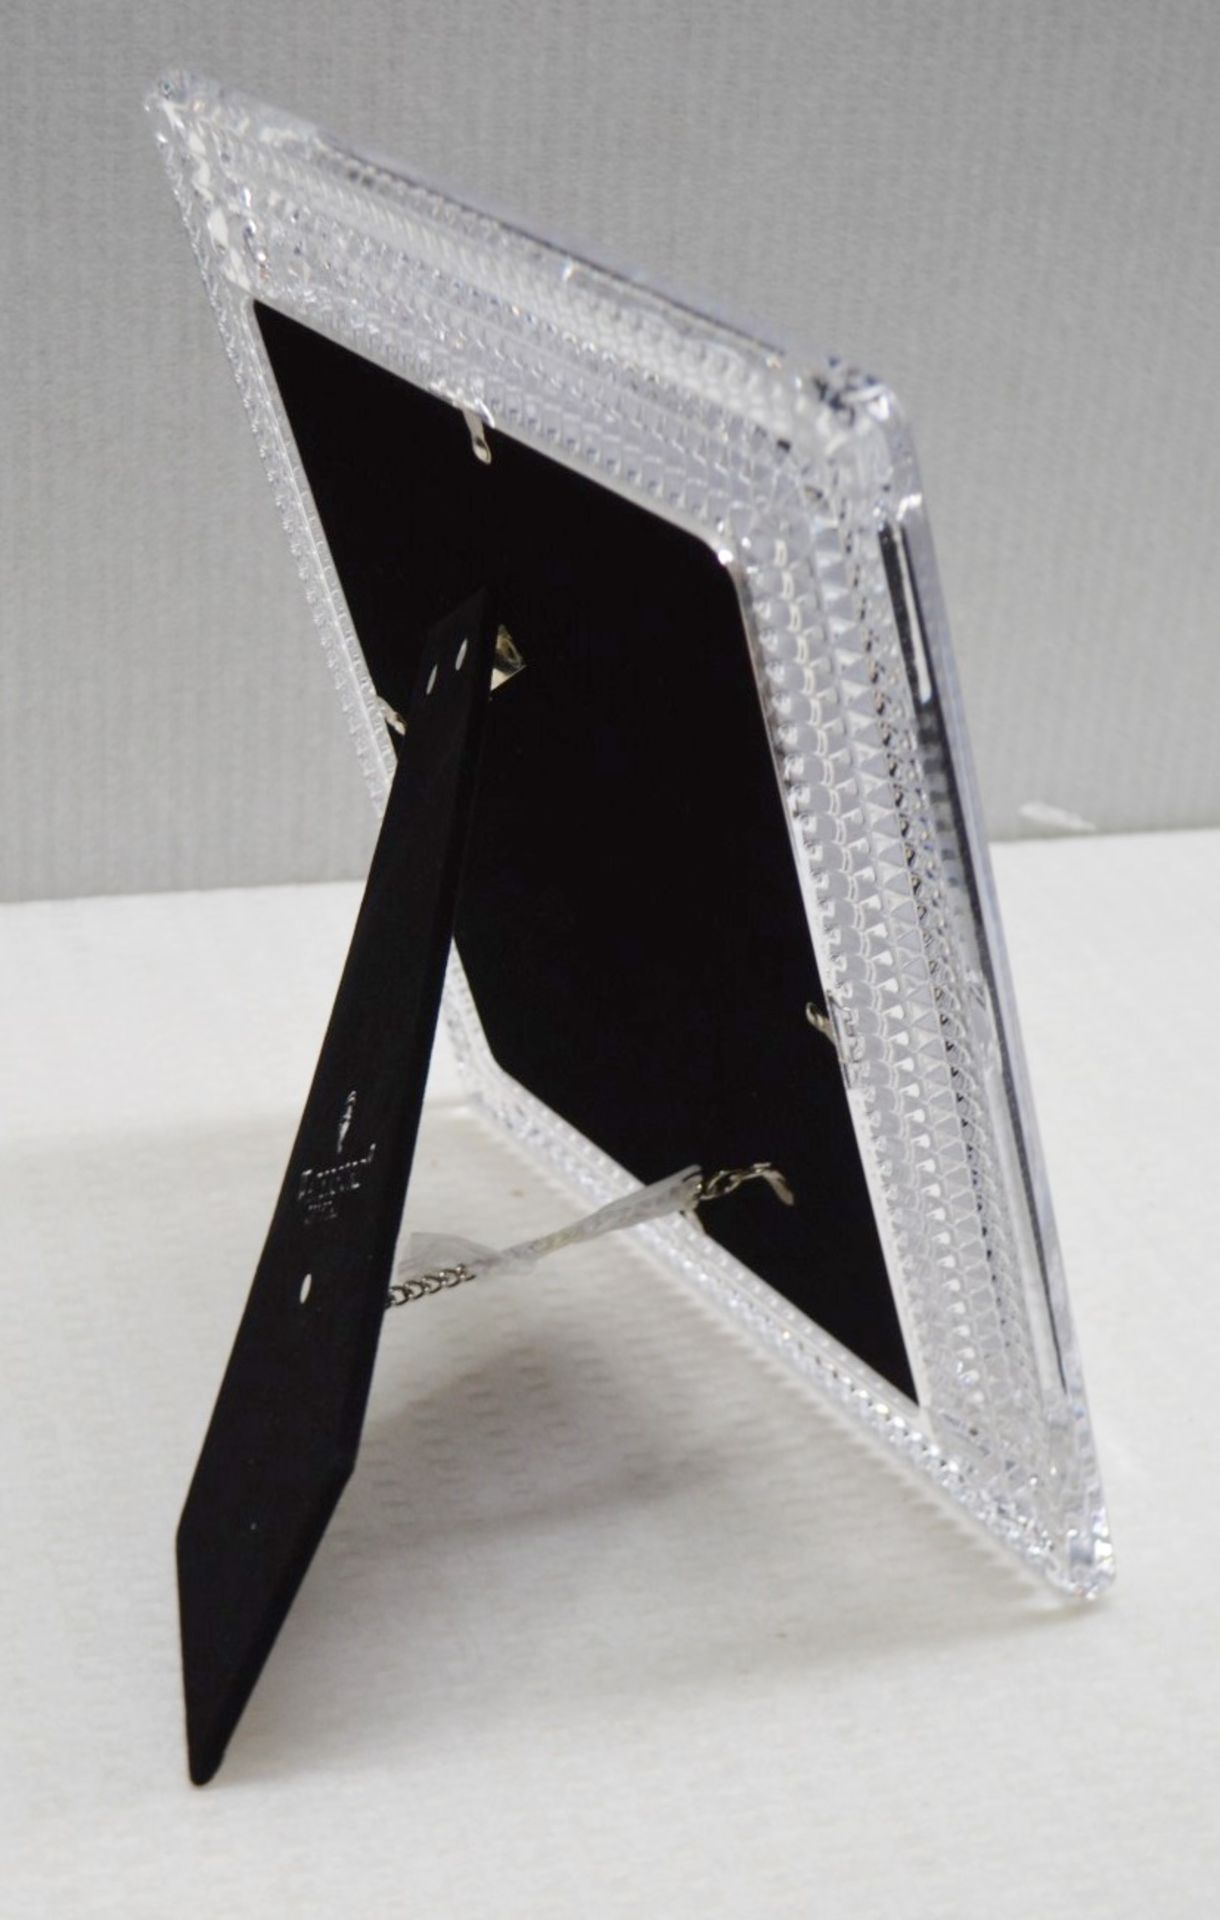 1 x Waterford Crystal Photo Frame - Ref: HHW078/JUL21 - PAL/A - CL679 - Location: Altrincham WA14 - Image 2 of 4